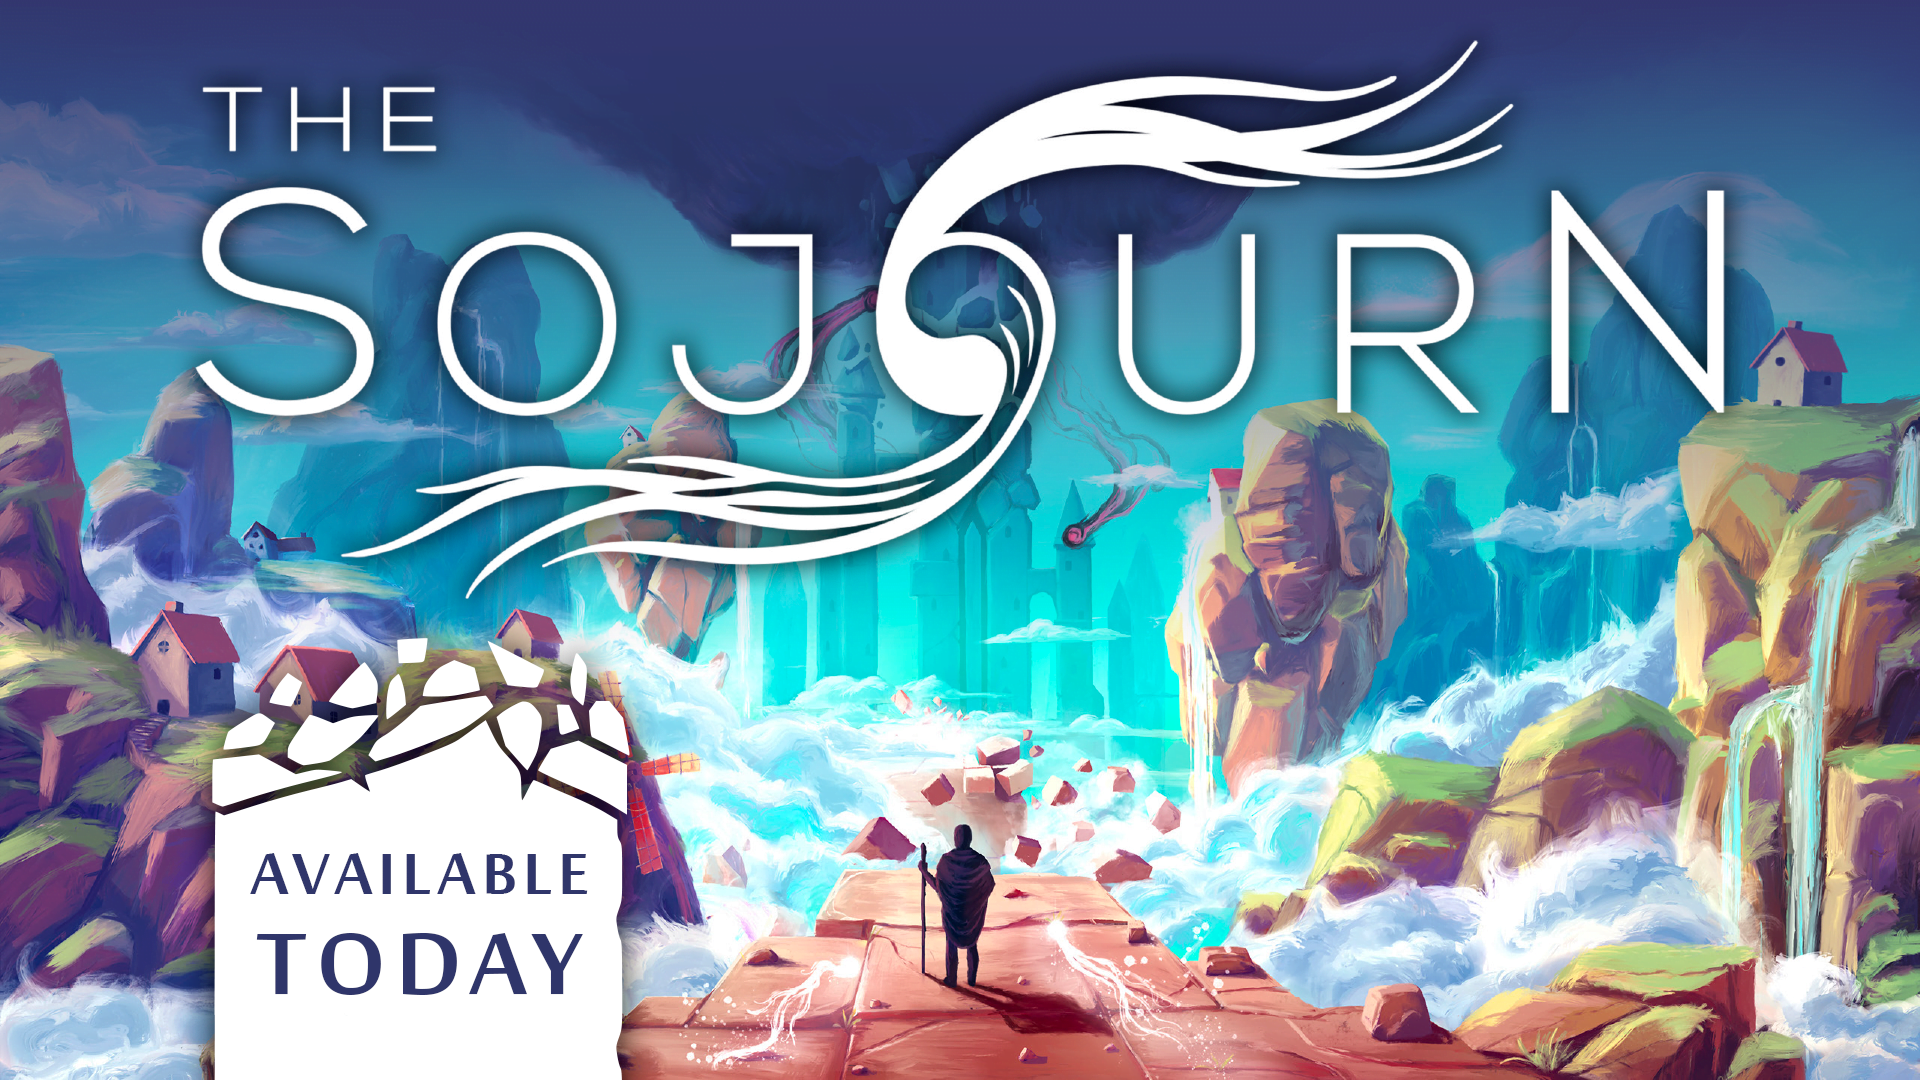 The sojourn: jogo puzzle já disponível! | the sojourn available today | will wright | the sojourn will wright